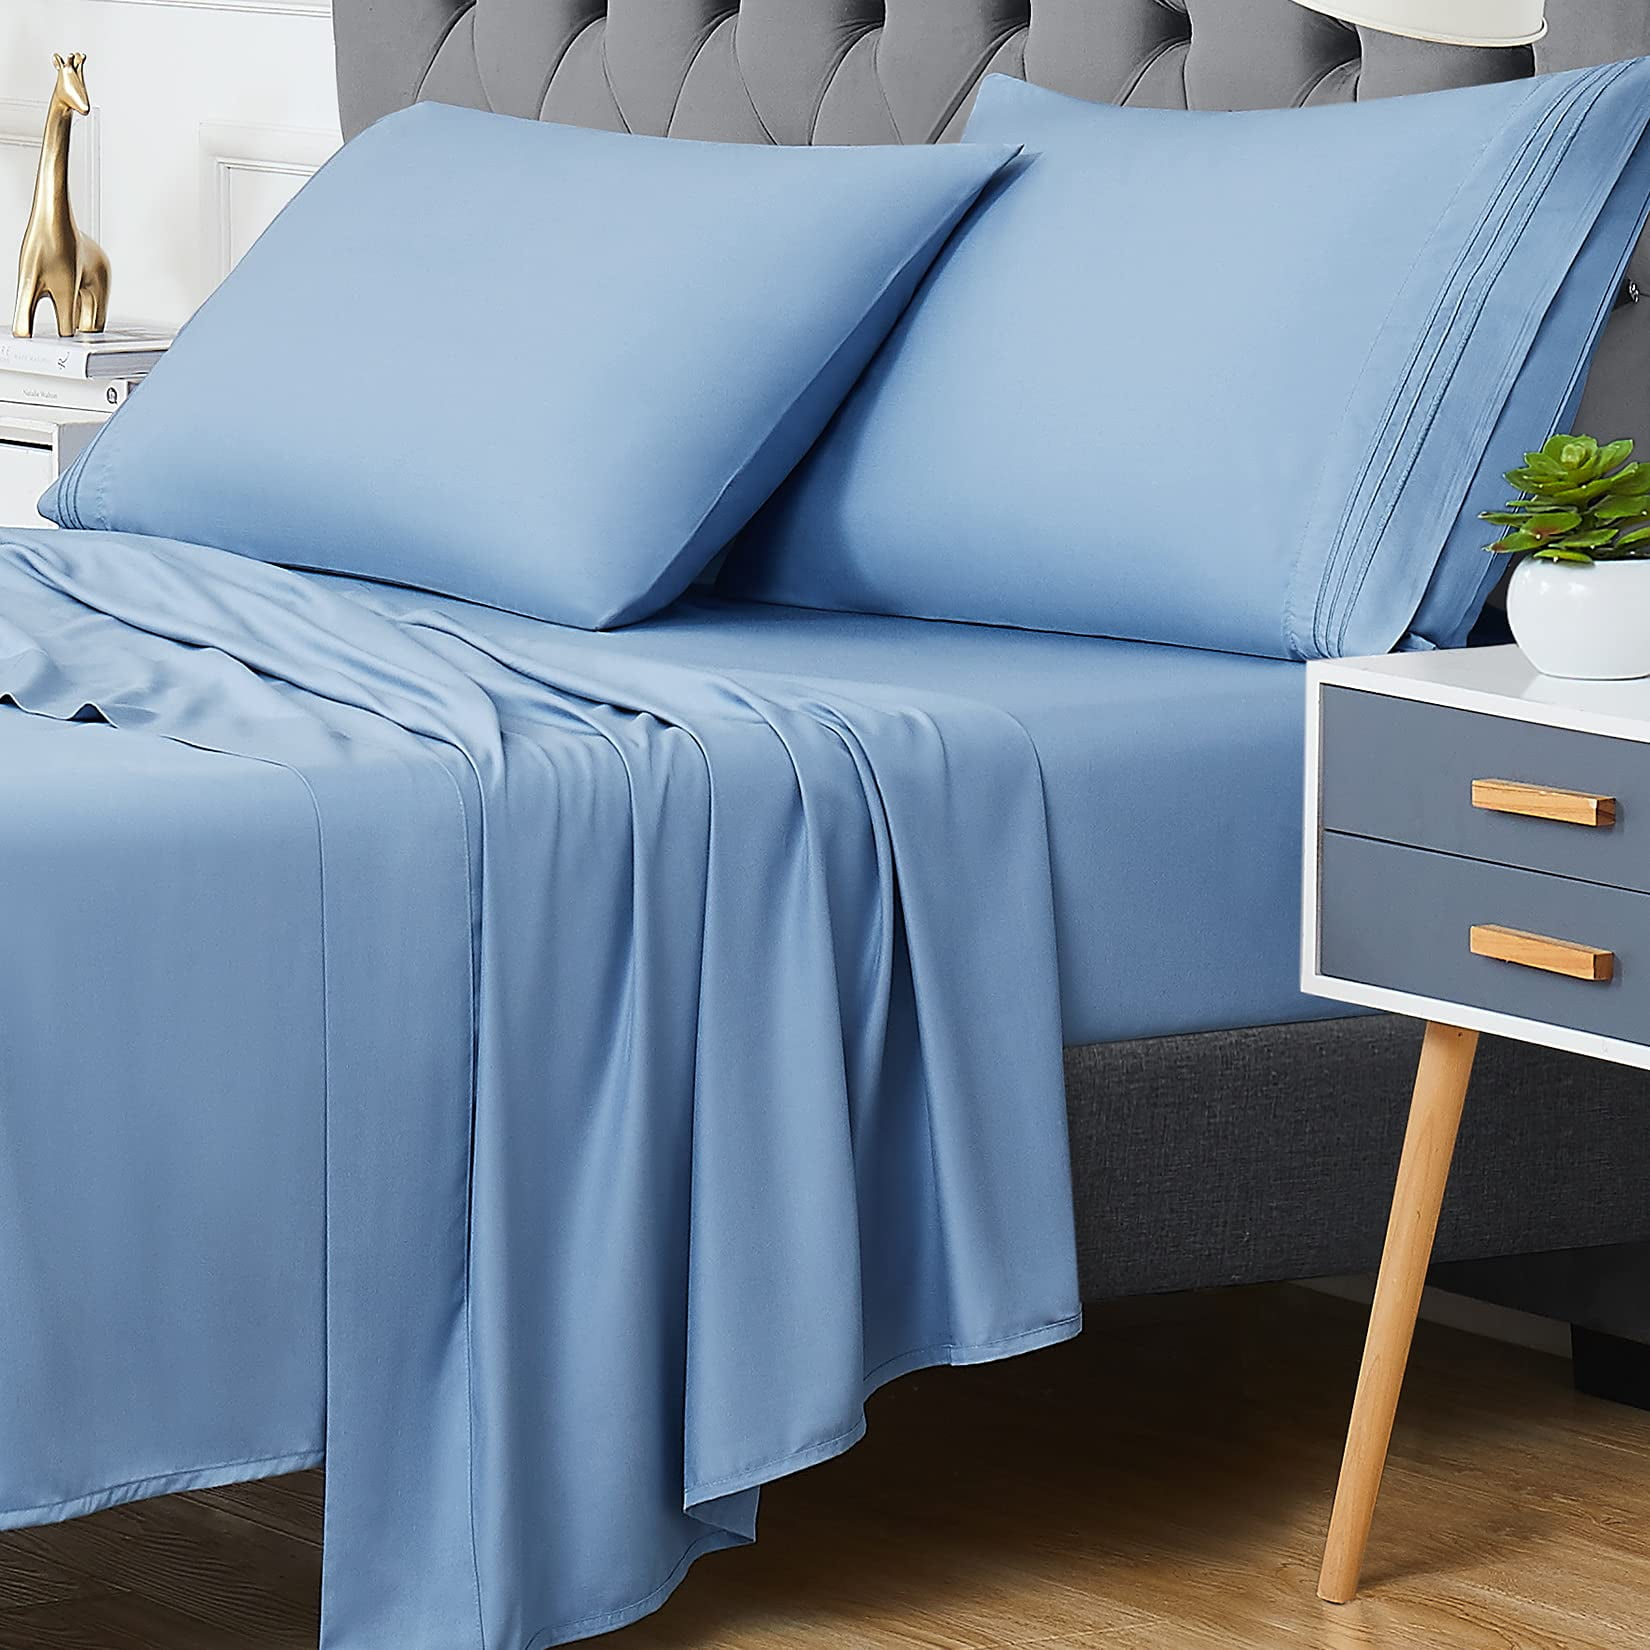 Bed Sheets and Pillowcase Set Twin Size100% Bamboo,Cool Sheets for Hot  Sleepers, 3 PCS Bedding Sheets with Deep Pocket Fitted Sheet, 1 Flat Sheet,  1 Pillowcase (Blue, Queen) - Walmart.com